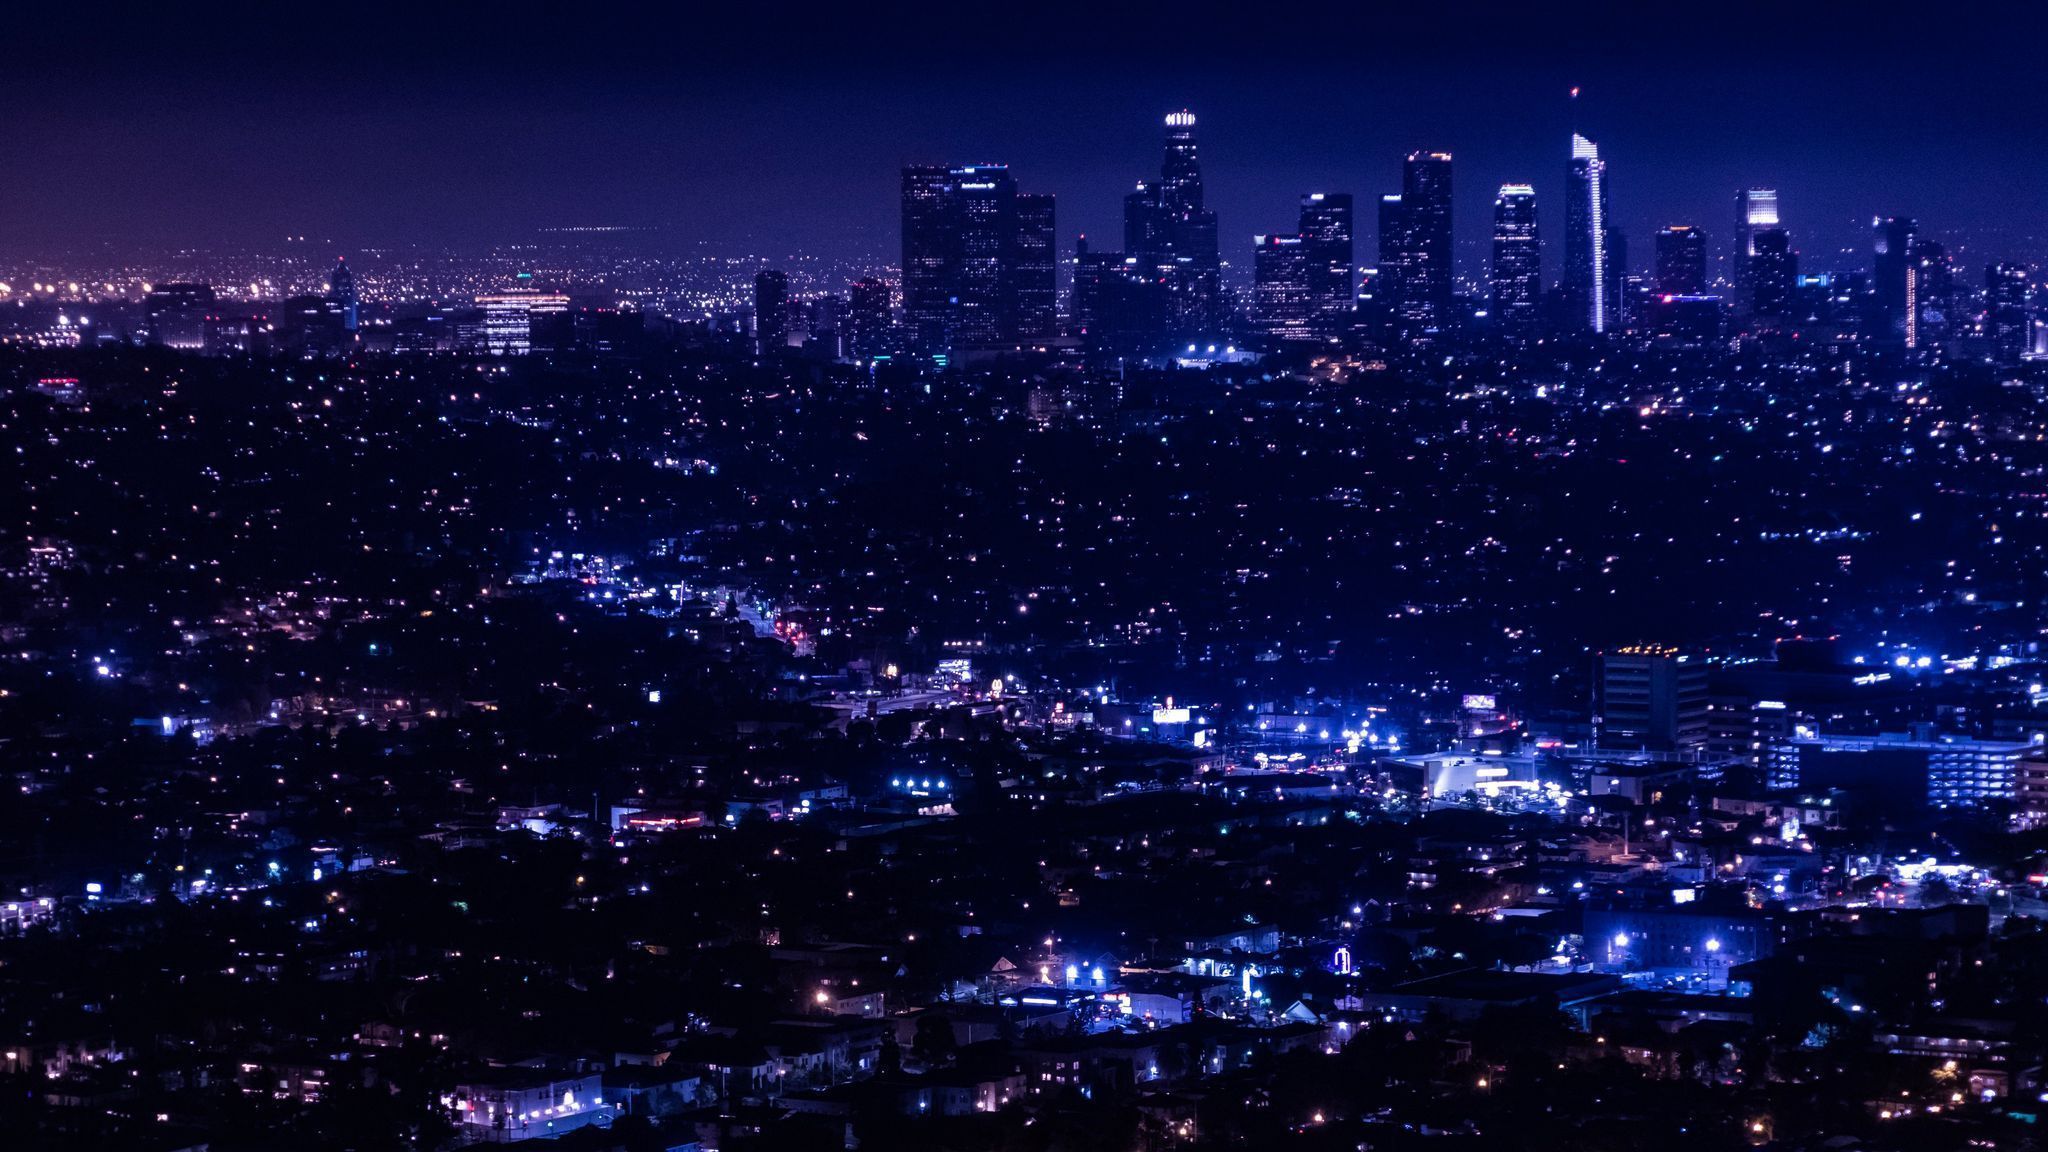 Download wallpaper 2048x1152 night city, city lights, overview, aerial view ultrawide monitor HD background